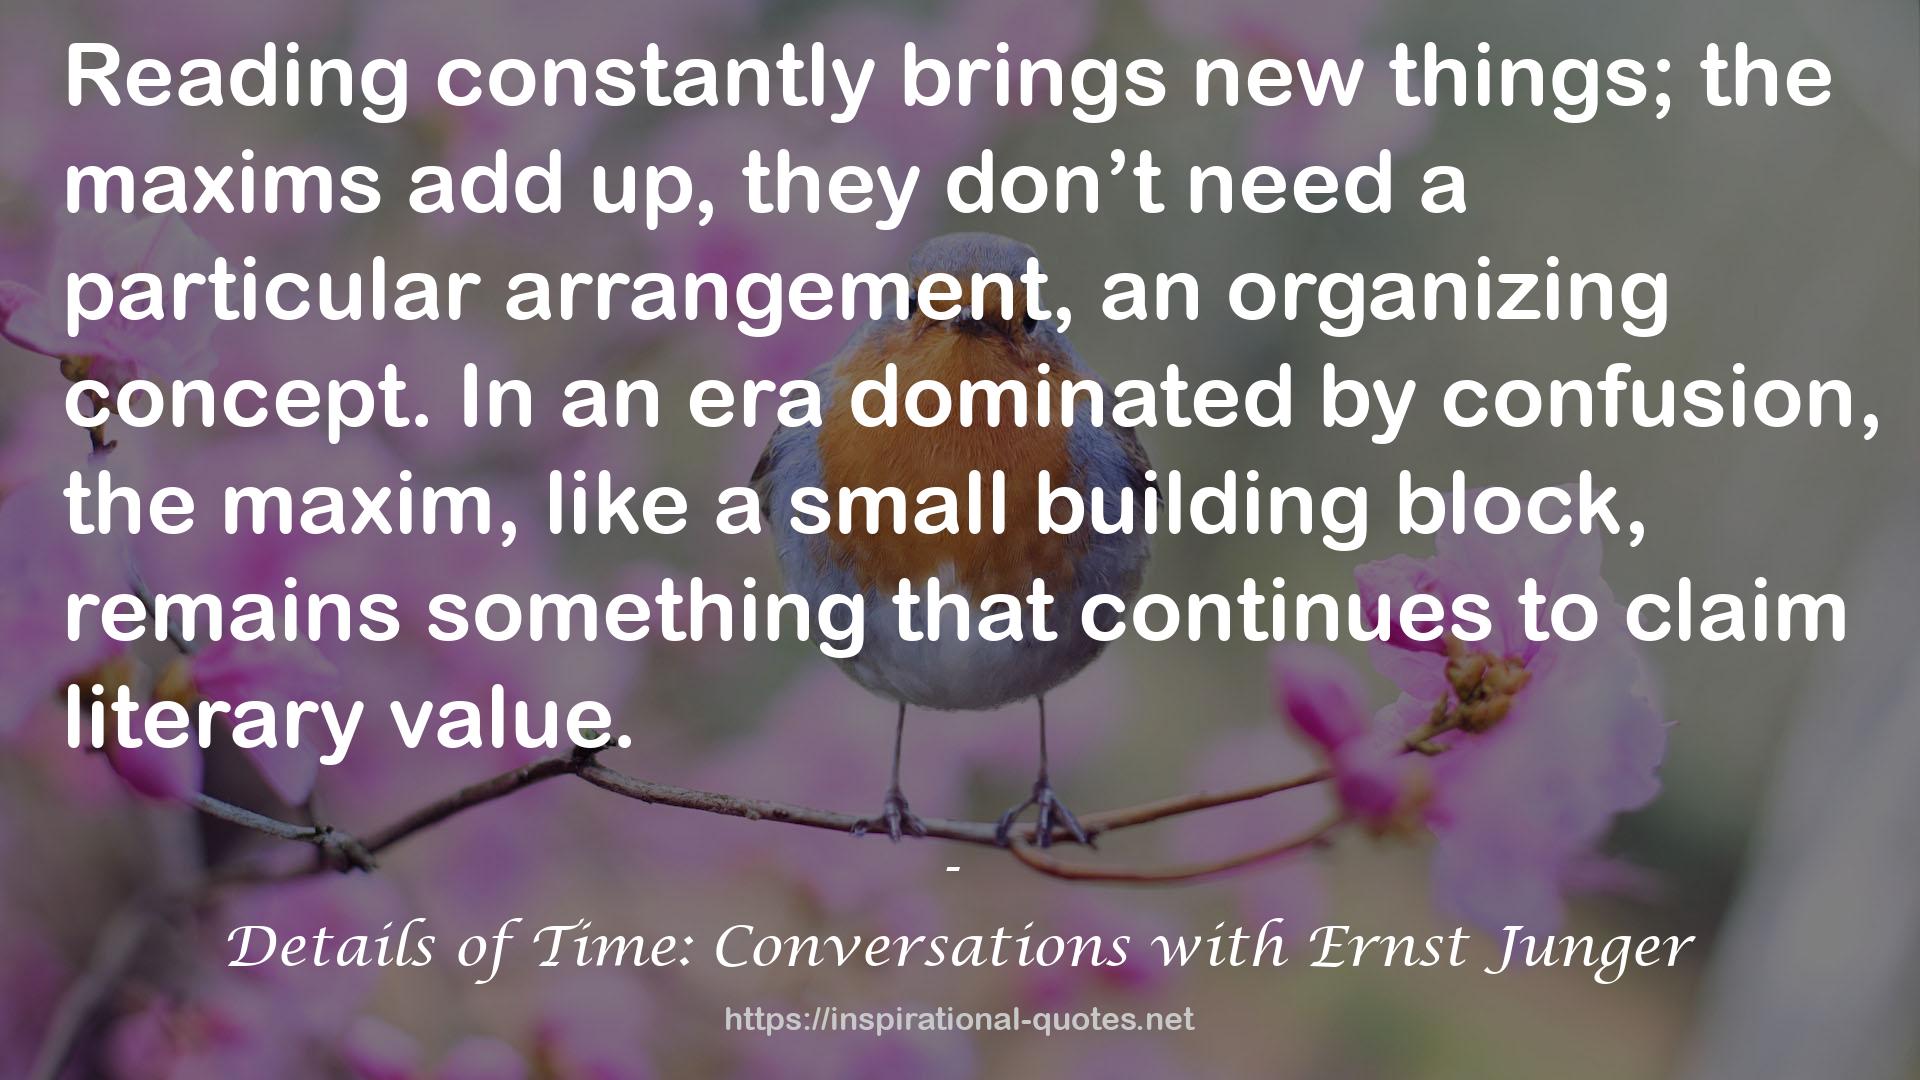 Details of Time: Conversations with Ernst Junger QUOTES